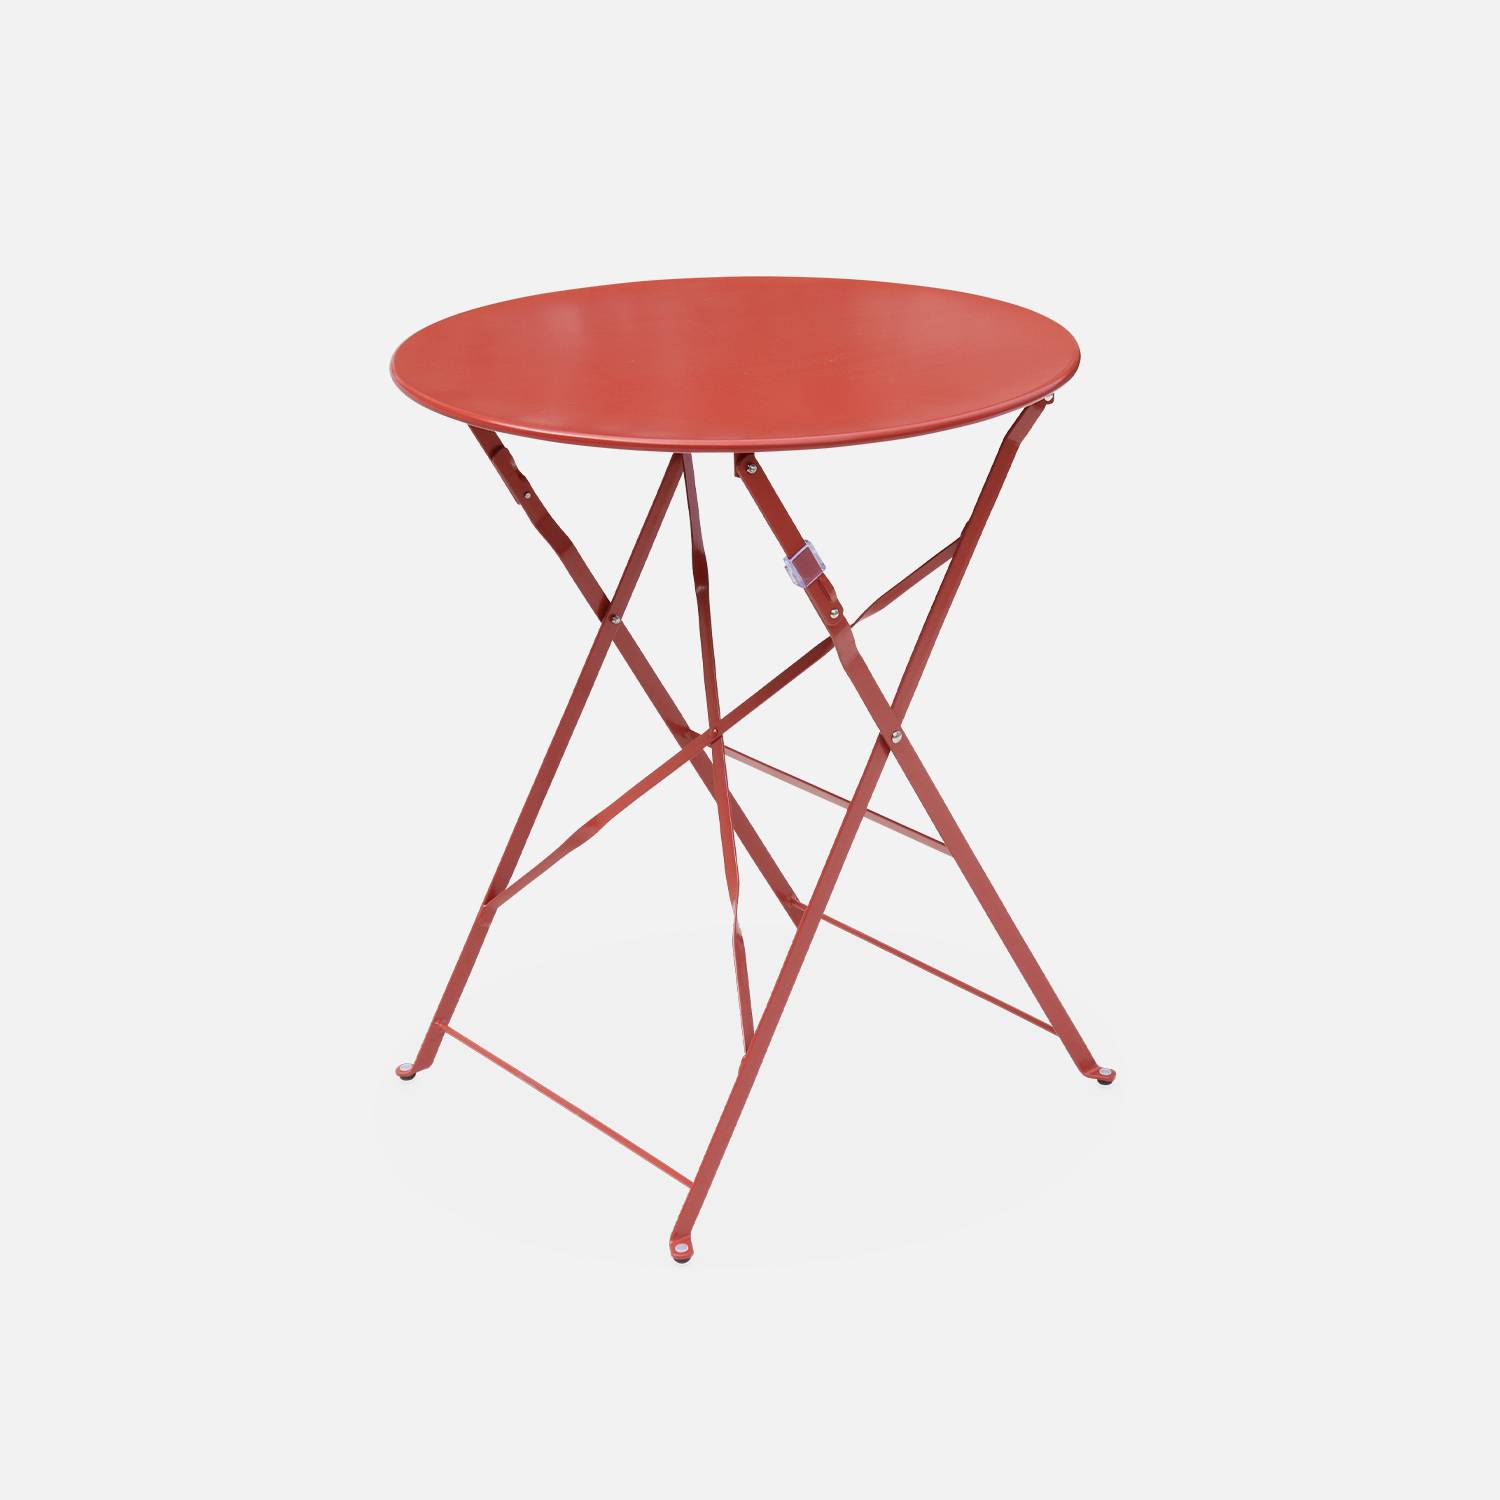 Foldable bistro garden table - Round Emilia terracota - Round table Ø60cm, thermo-lacquered steel | sweeek